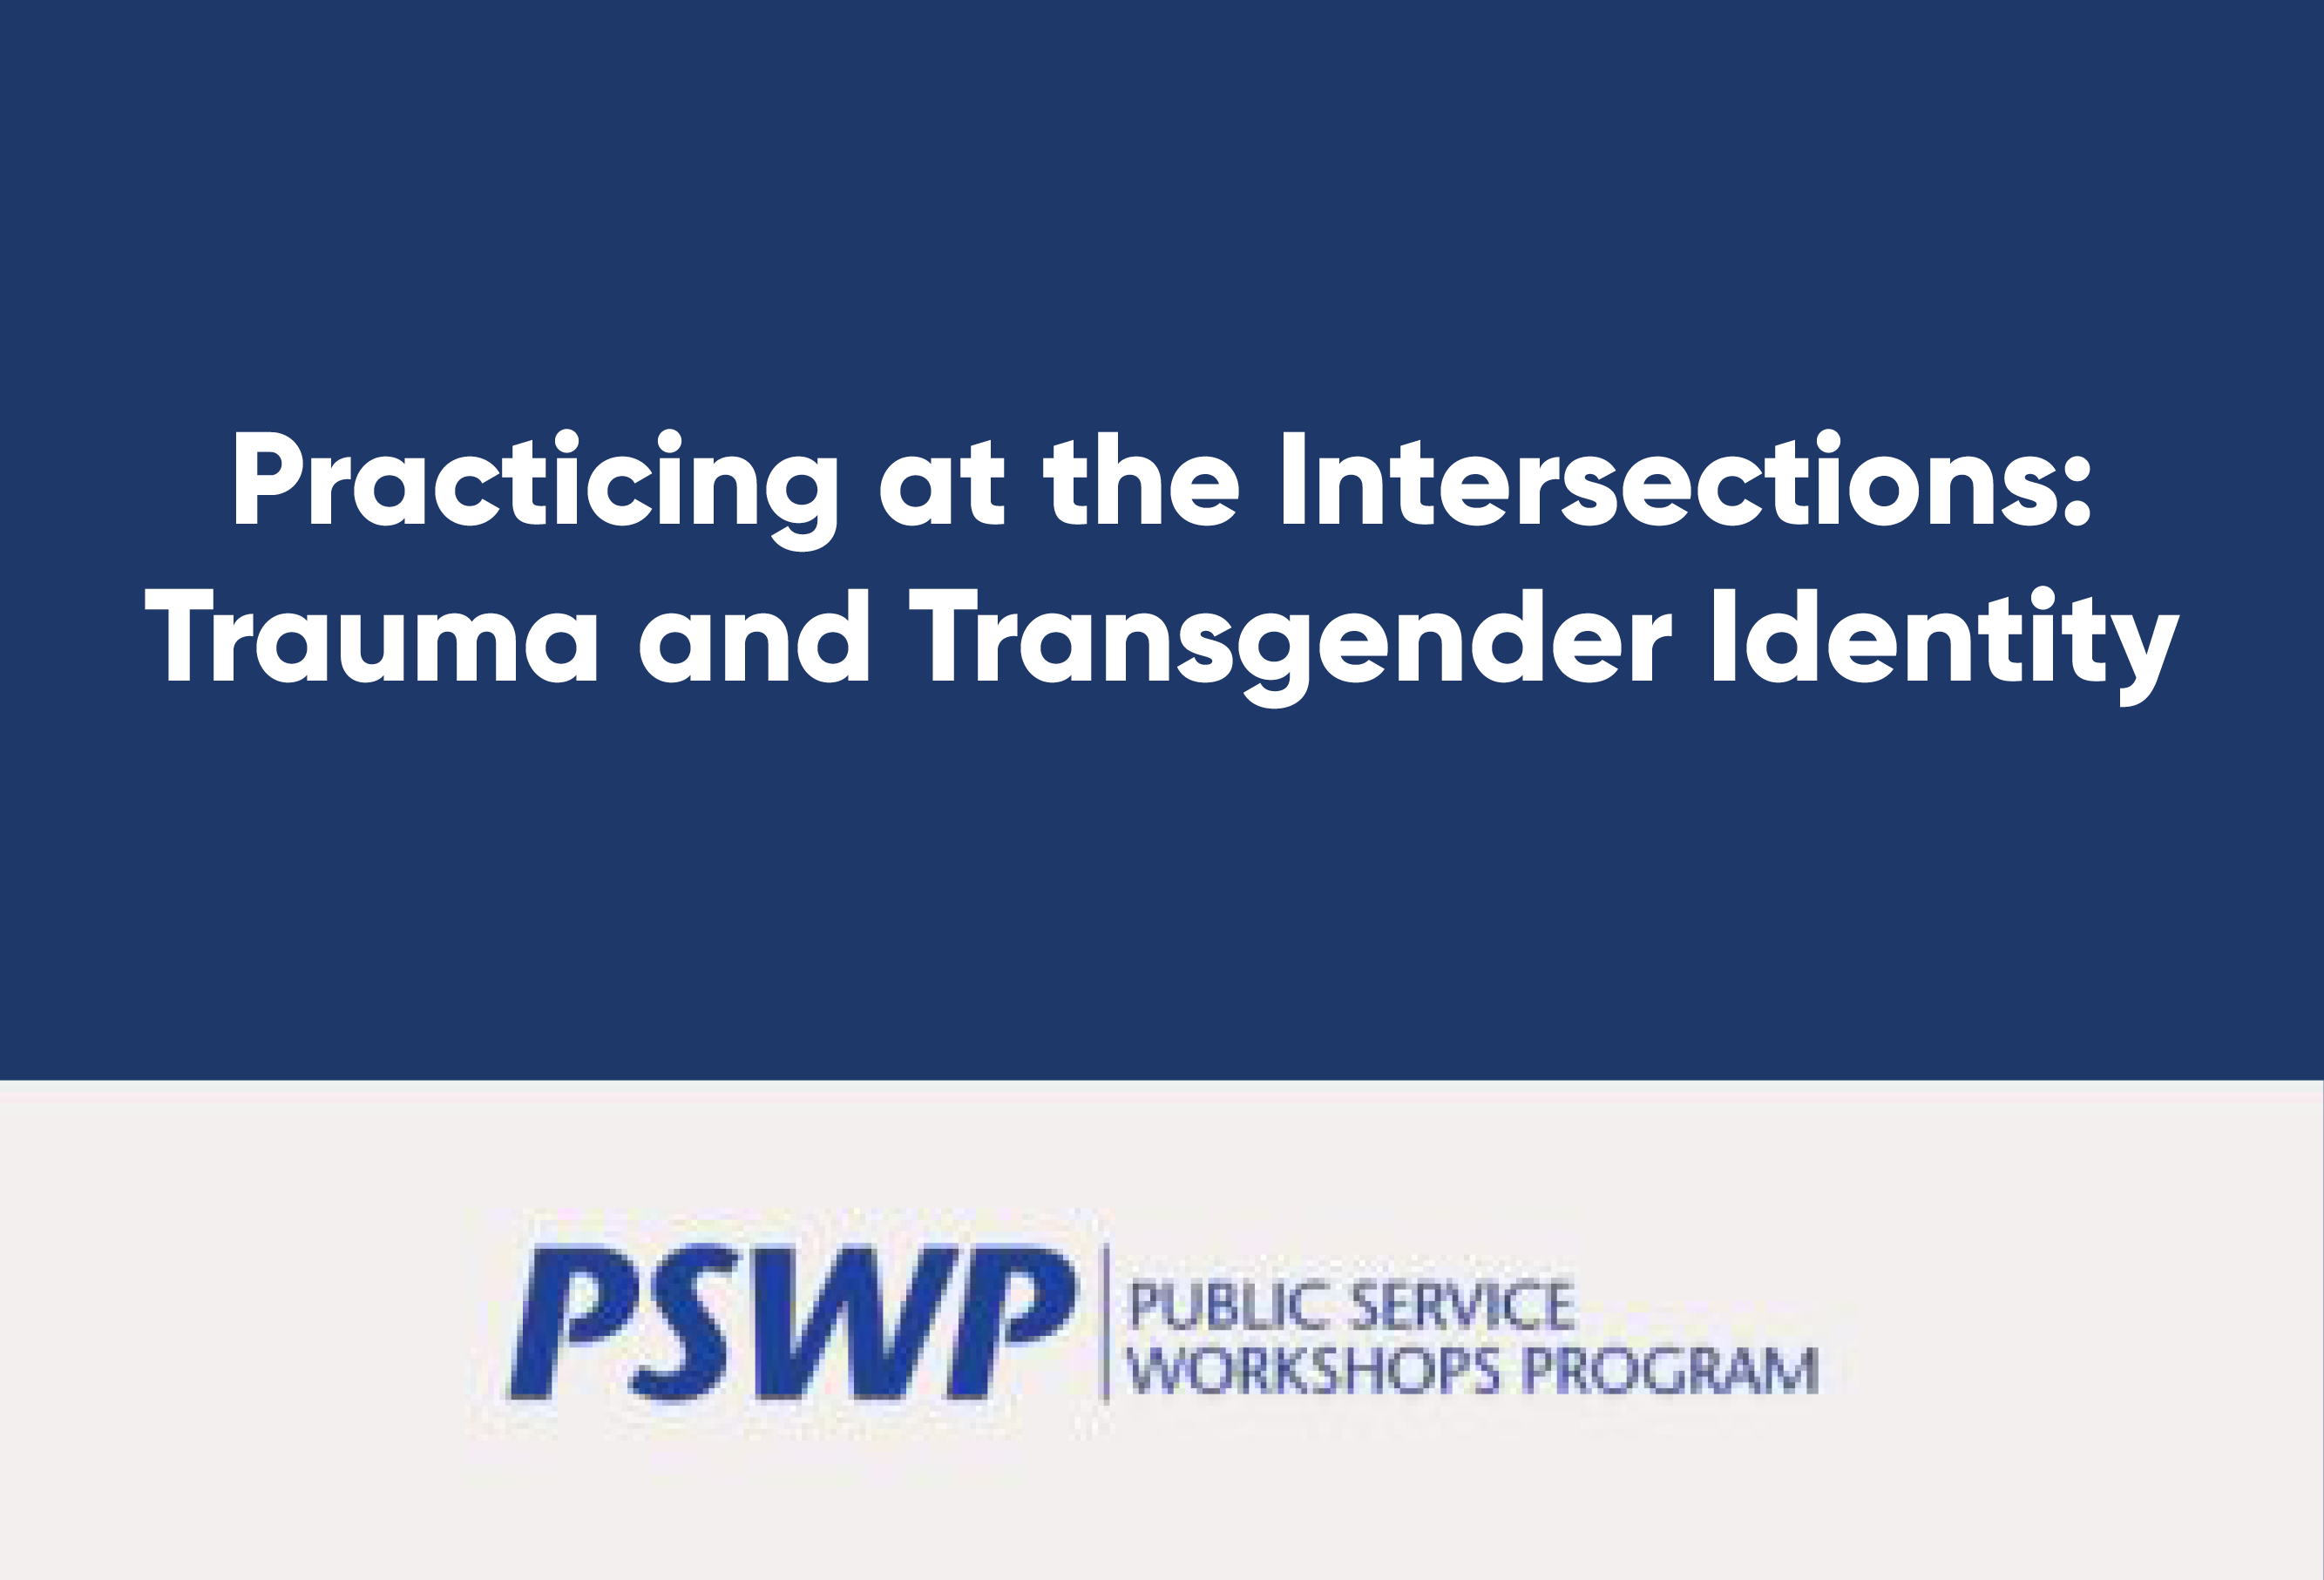 Dec. 9: Practicing at the Intersections: Trauma and Transgender Identity 